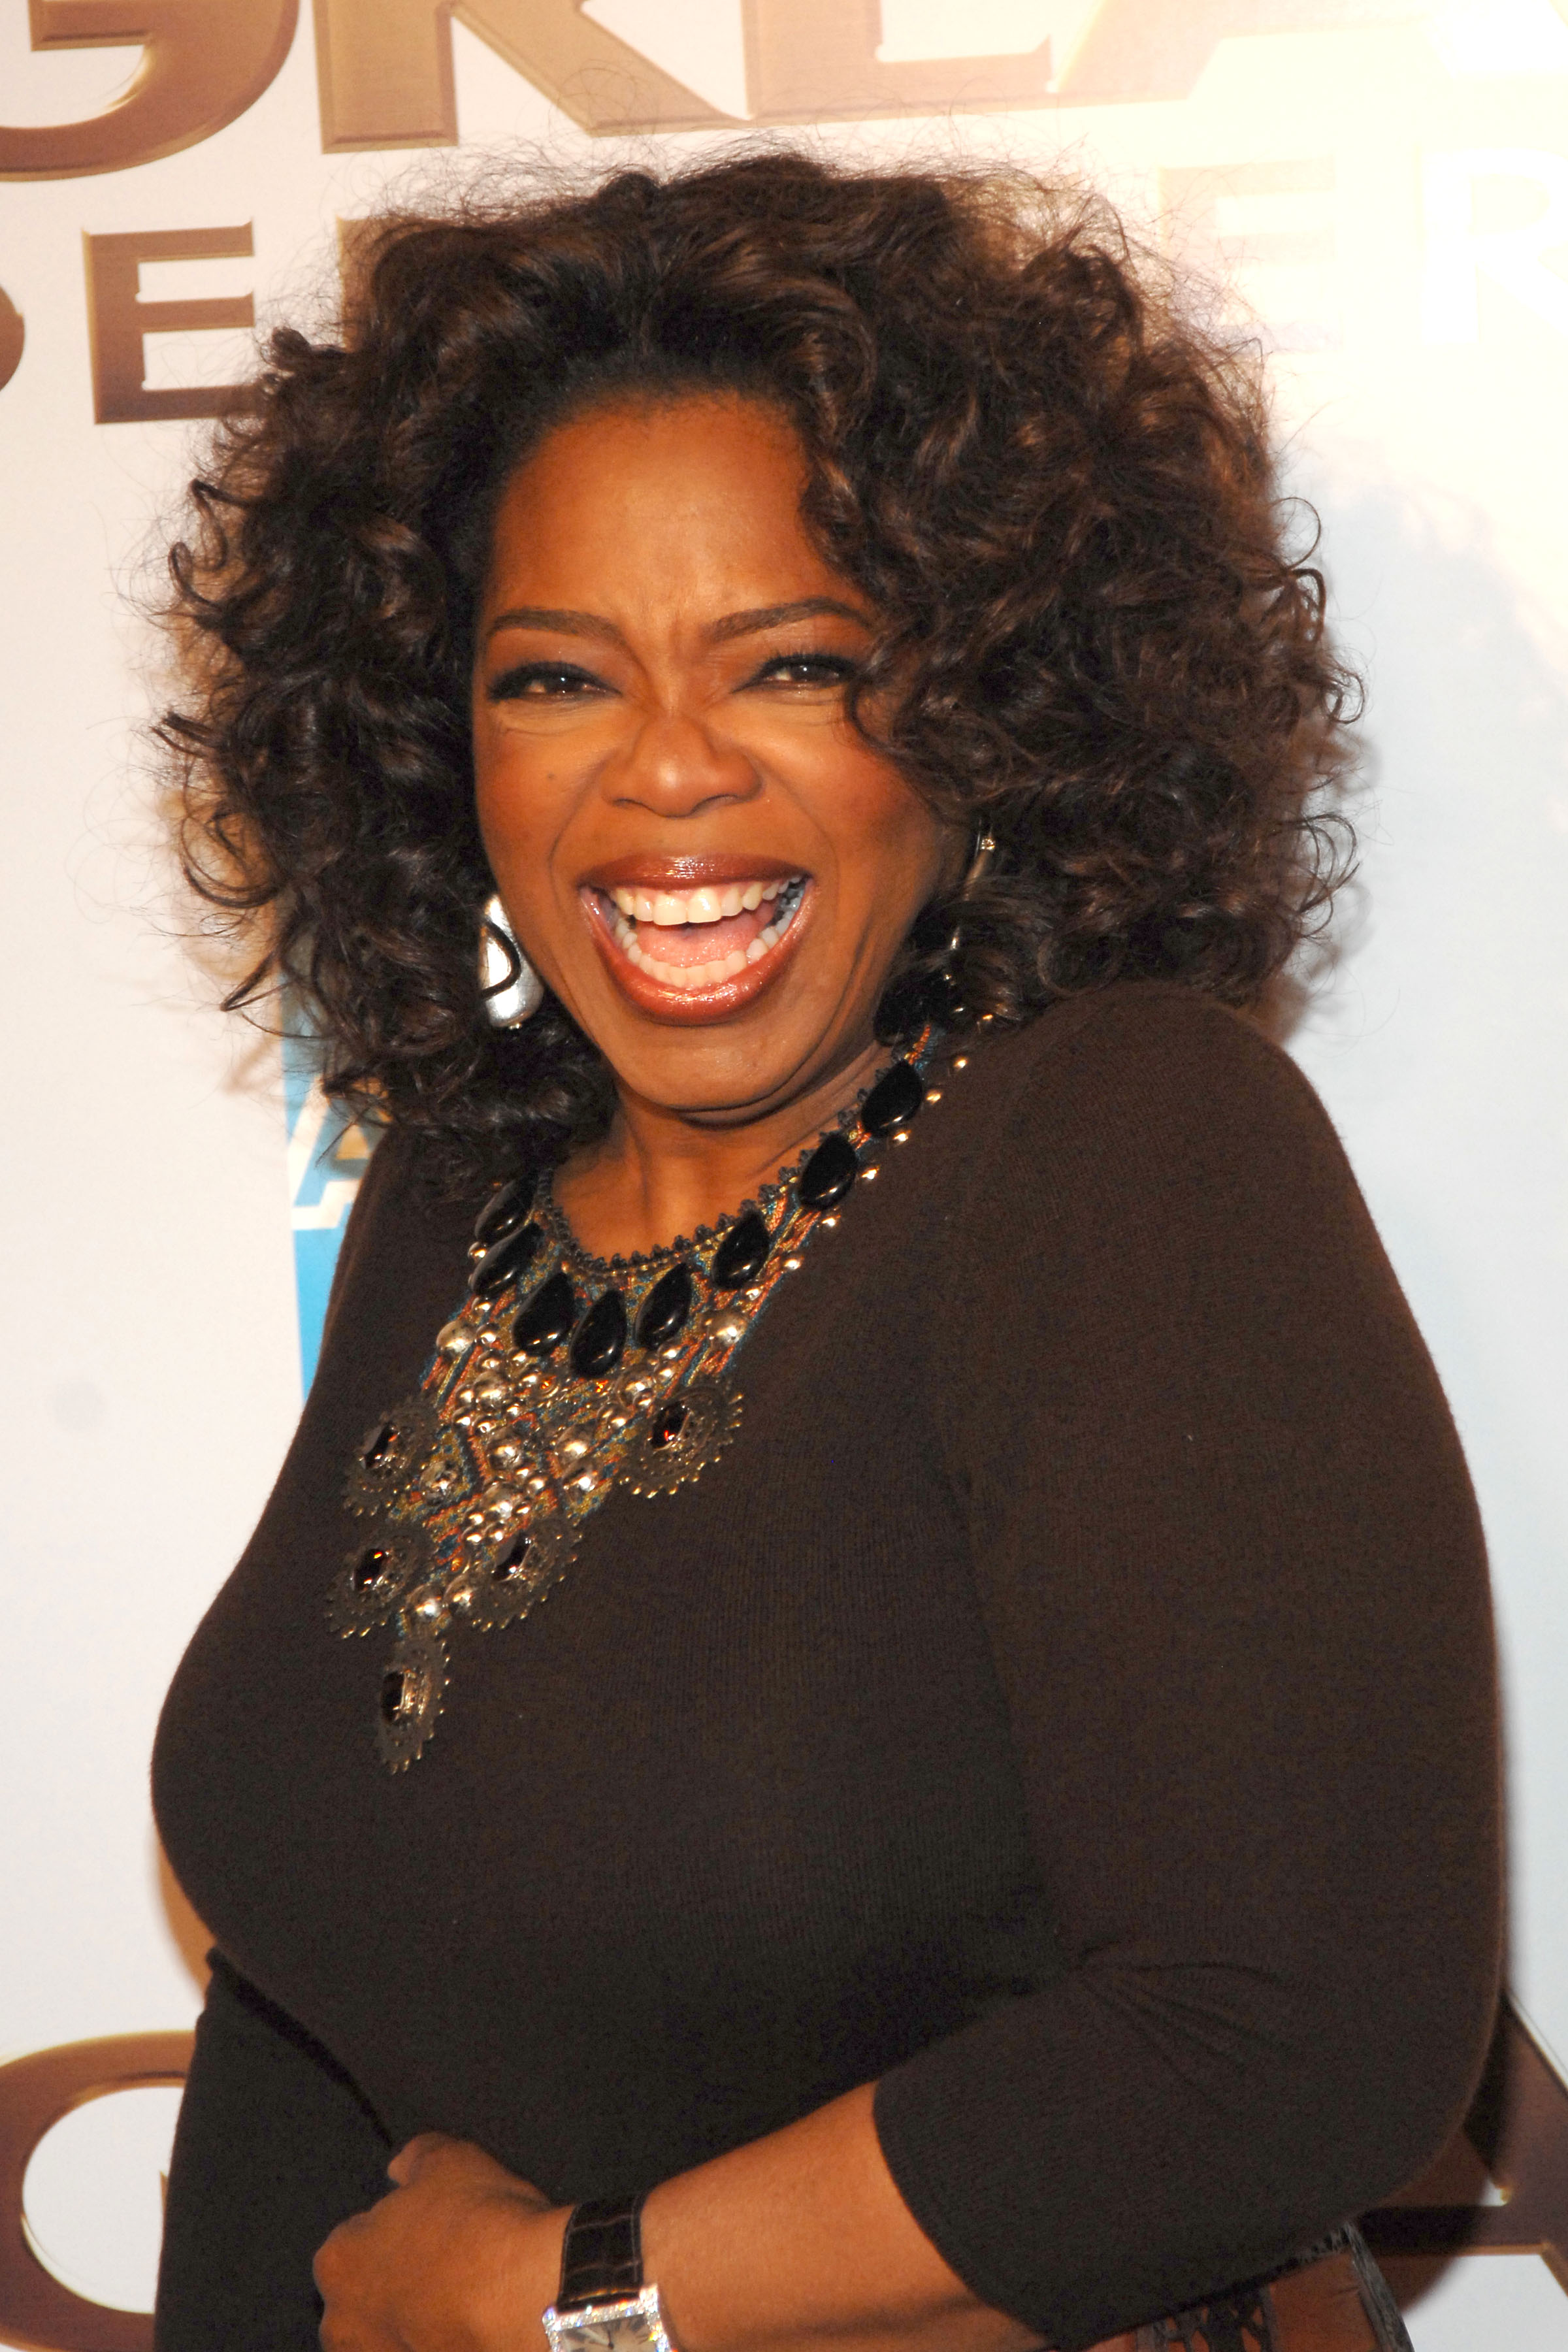 Oprah Winfrey graces the premiere of "The Great Debaters" at Arclight Cinemas in Hollywood, California on November 11, 2007 | Source: Getty Images